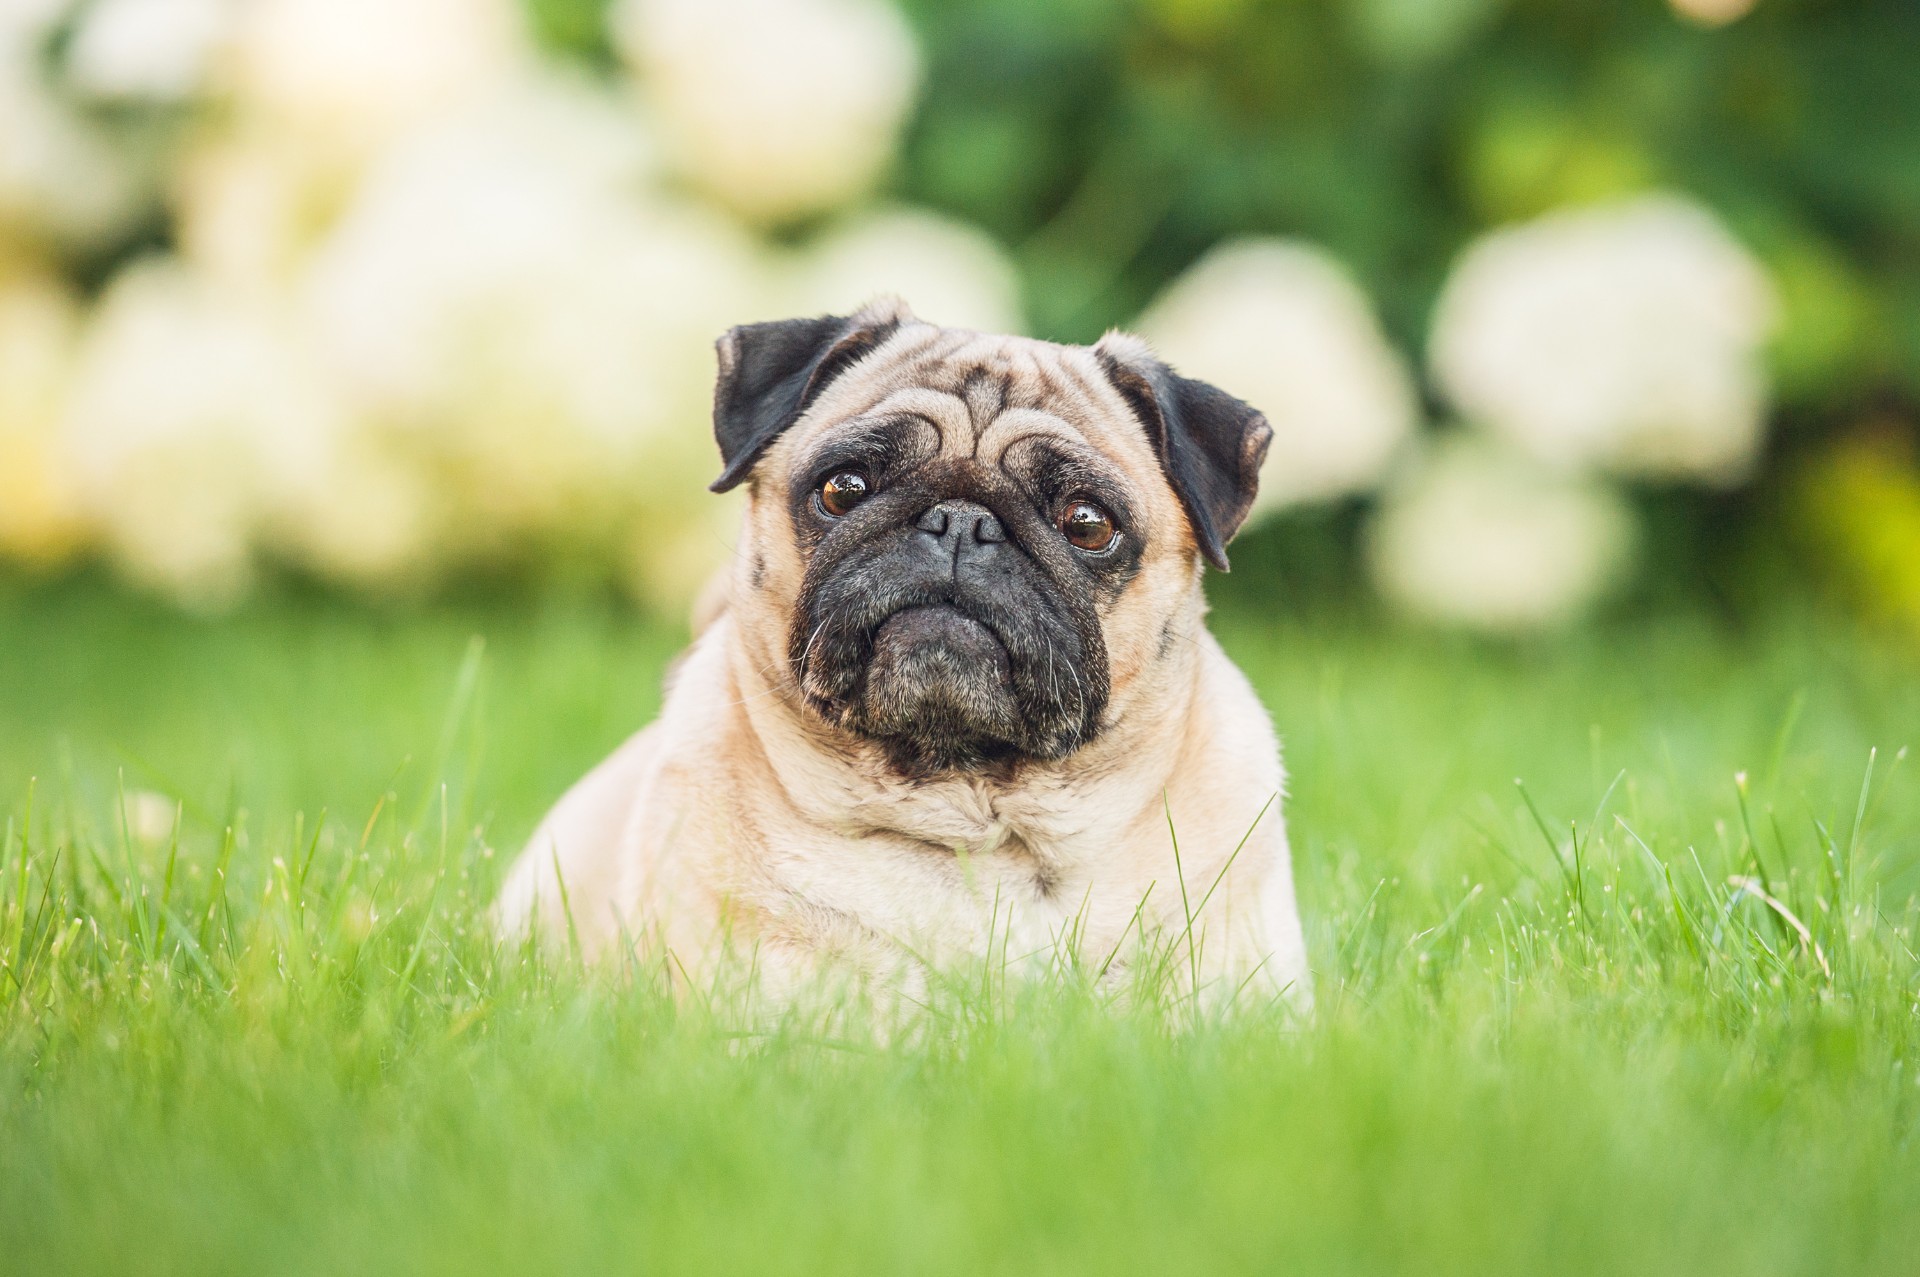 Pug sitting in long grass